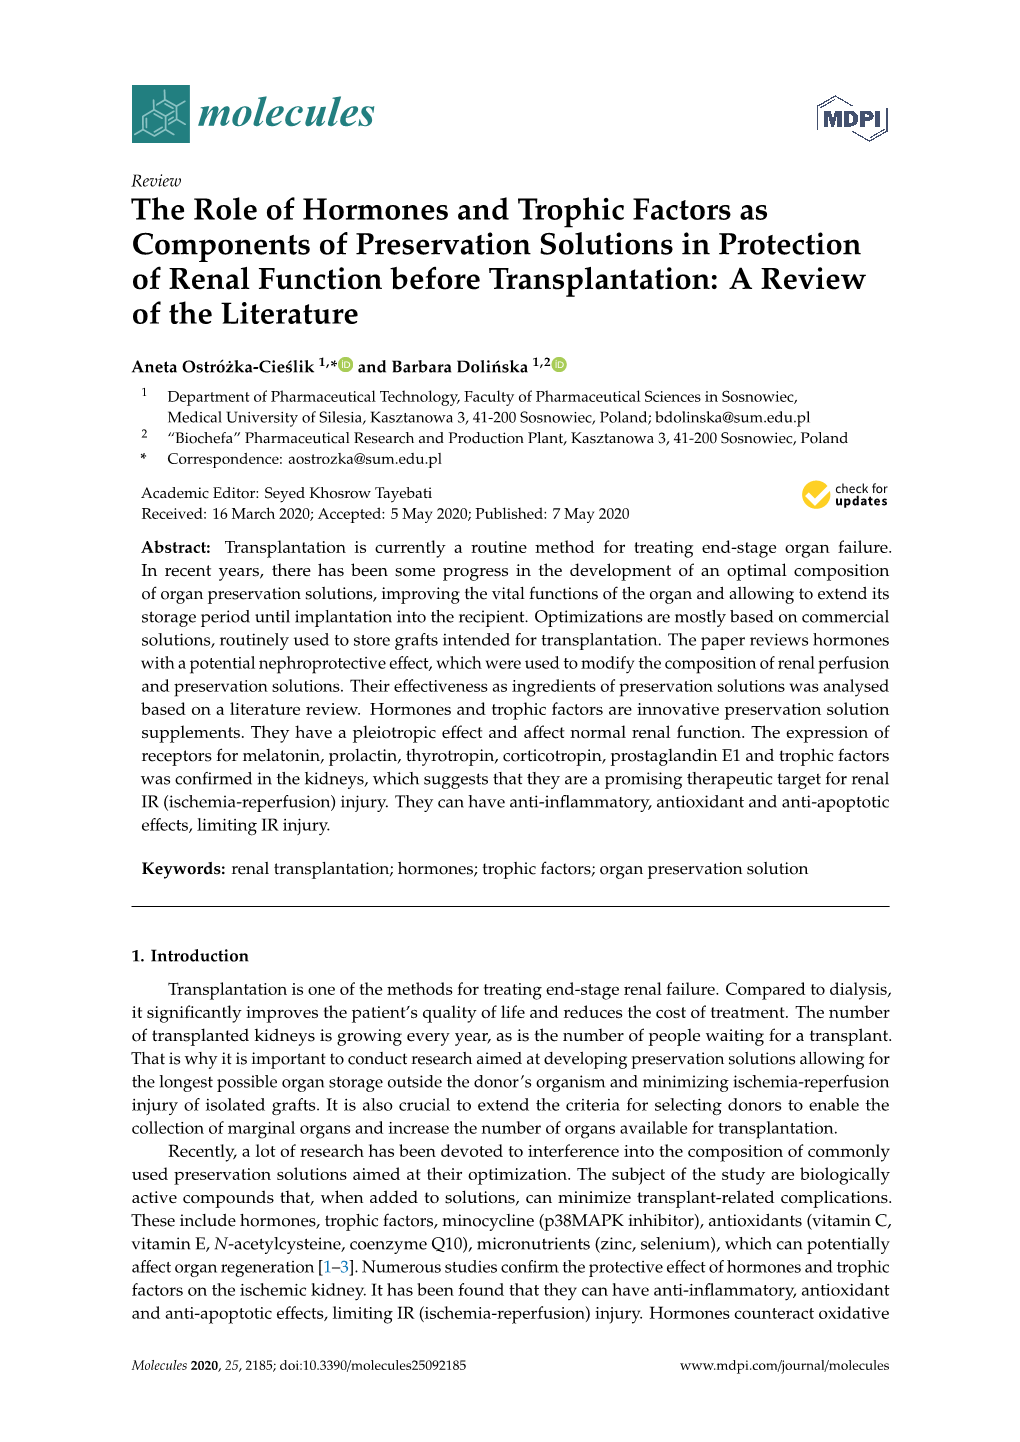 The Role of Hormones and Trophic Factors As Components of Preservation Solutions in Protection of Renal Function Before Transplantation: a Review of the Literature